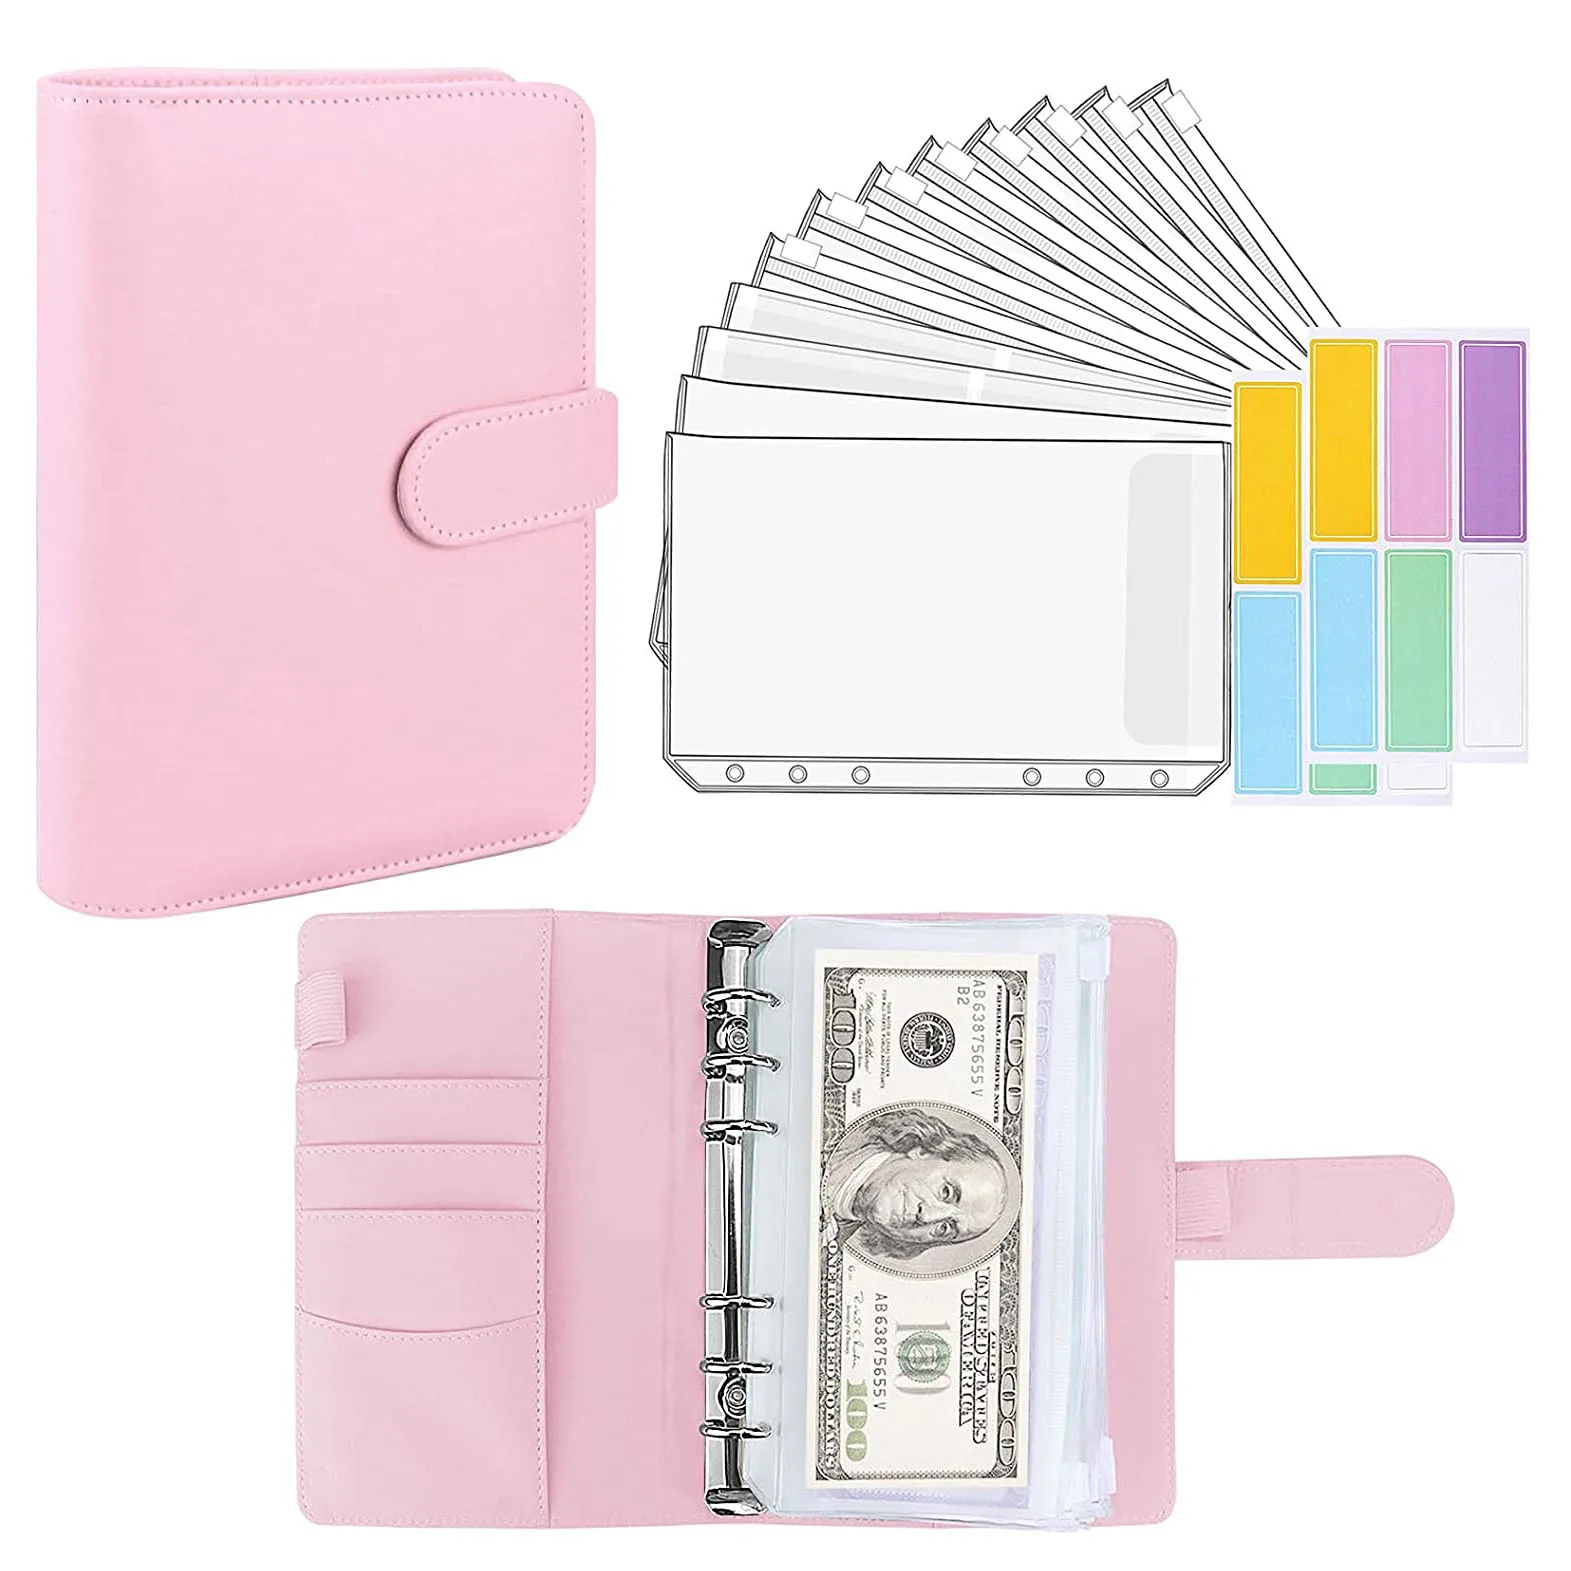 15 Pieces A6 Binder Budget Planner Cash Envelope System with Budget Envelopes Binder Pockets Cash Envelope Wallet for Budgeting a6 pu leather binder set cash envelopes planner organizer for budgeting with binder pockets budget sheets filler paper stickers